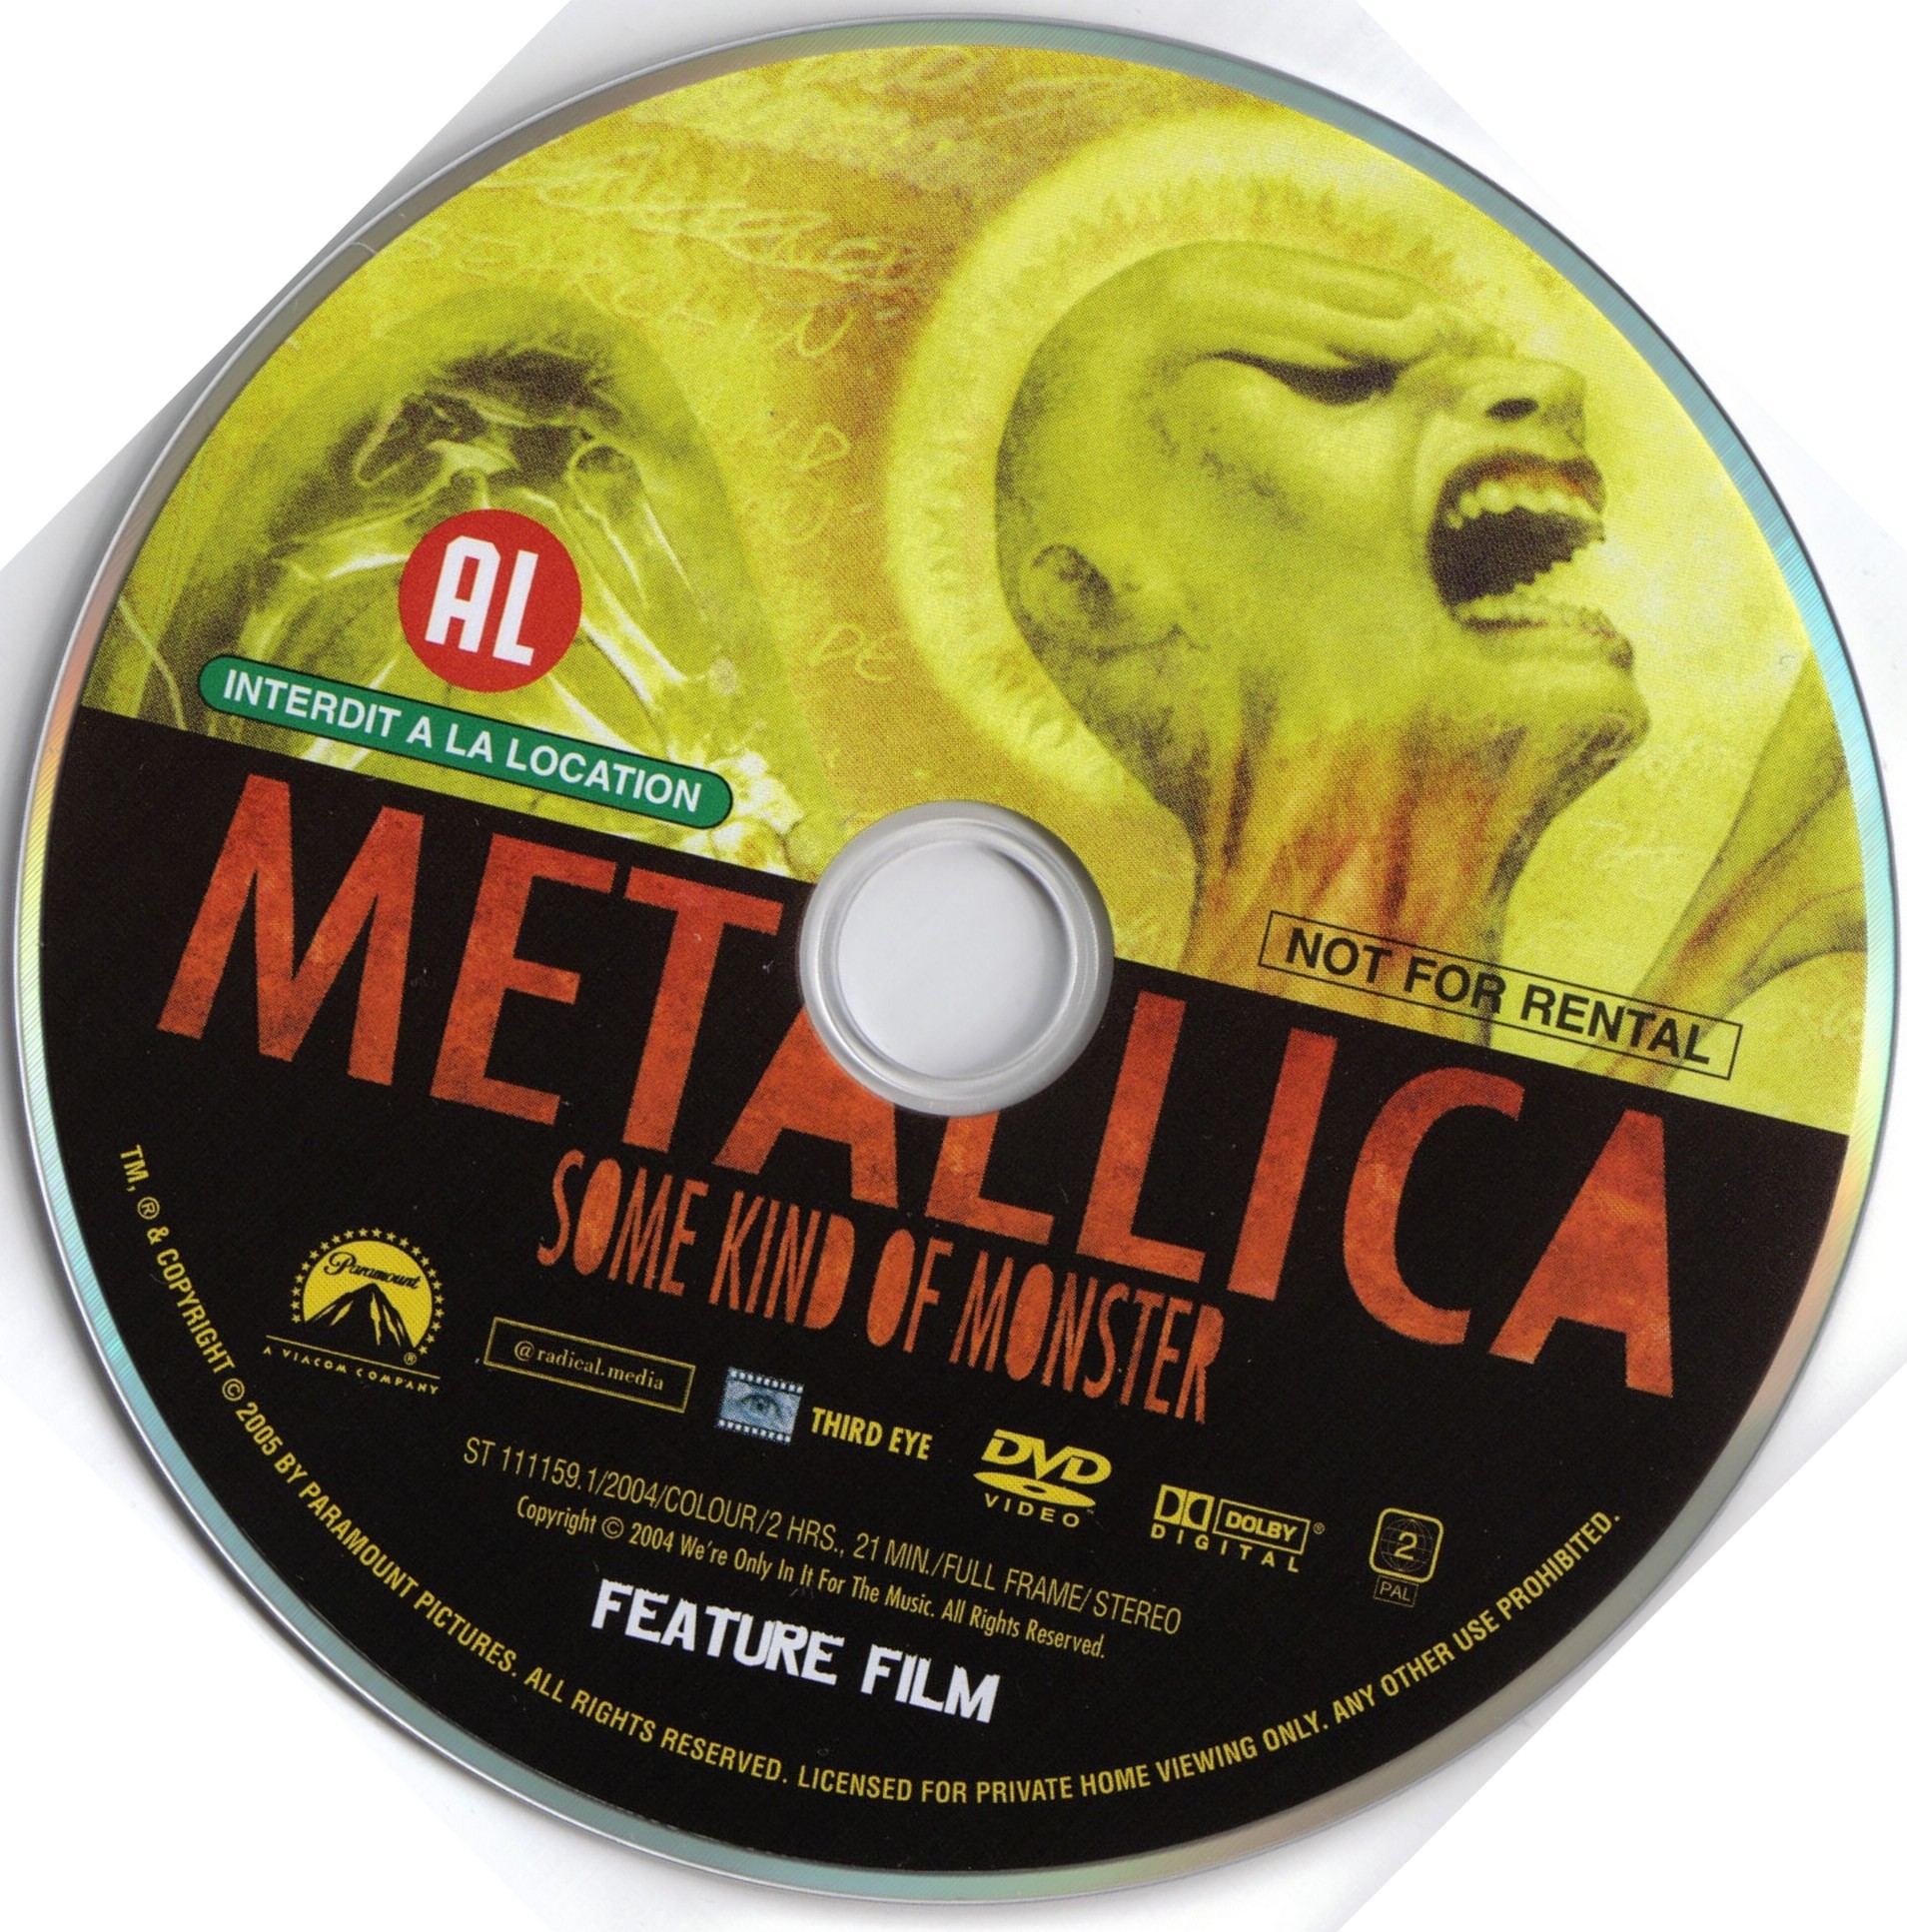 Metallica some kind of monster DISC 1